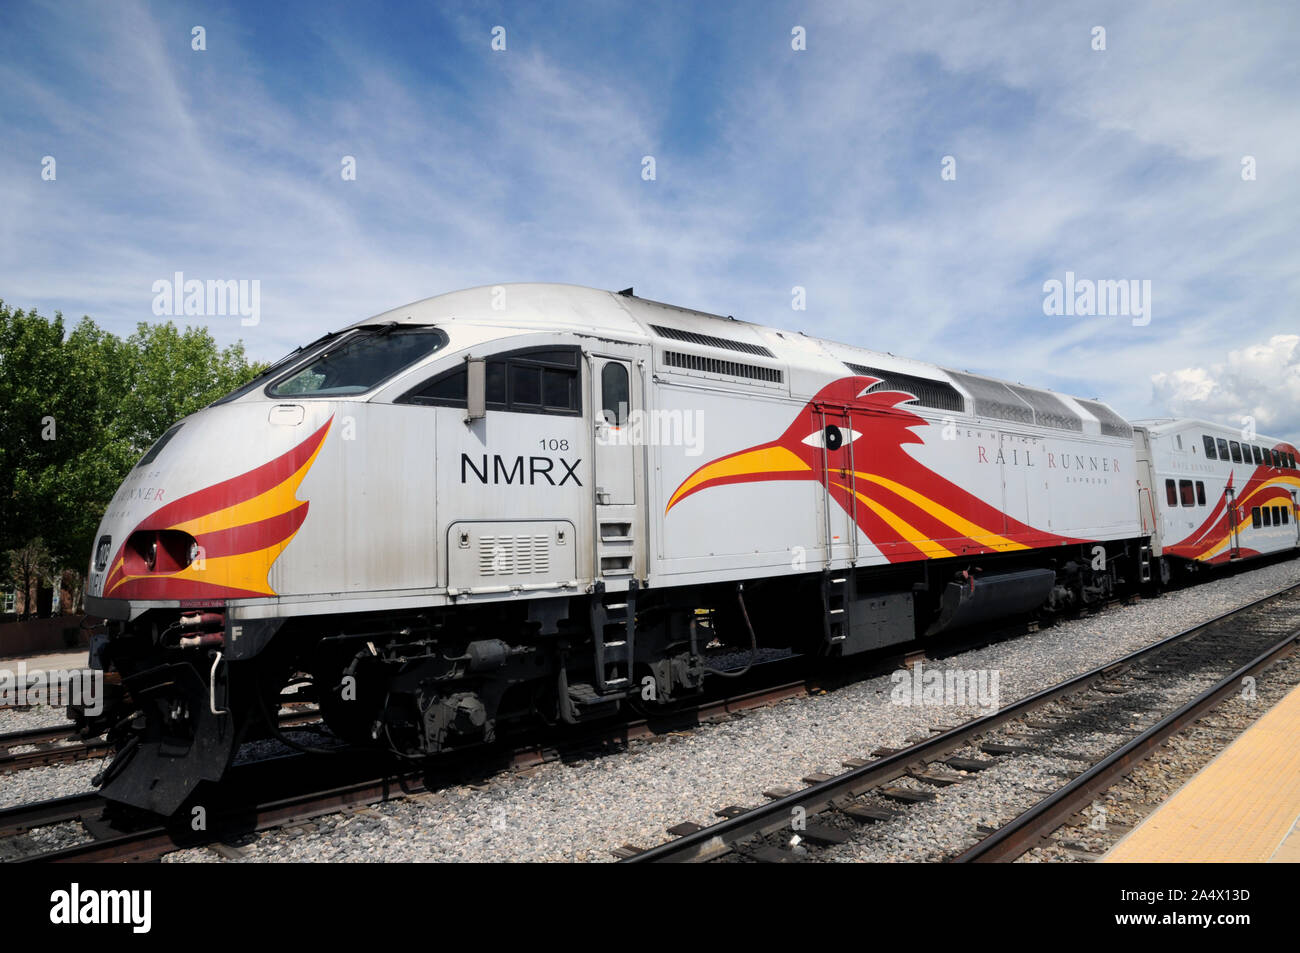 A New Mexico Rail Runner Express at Santa Fe Railyard. It is a commuter rail system serving the metropolitan areas of Santa Fe and Alburqueque. Stock Photo